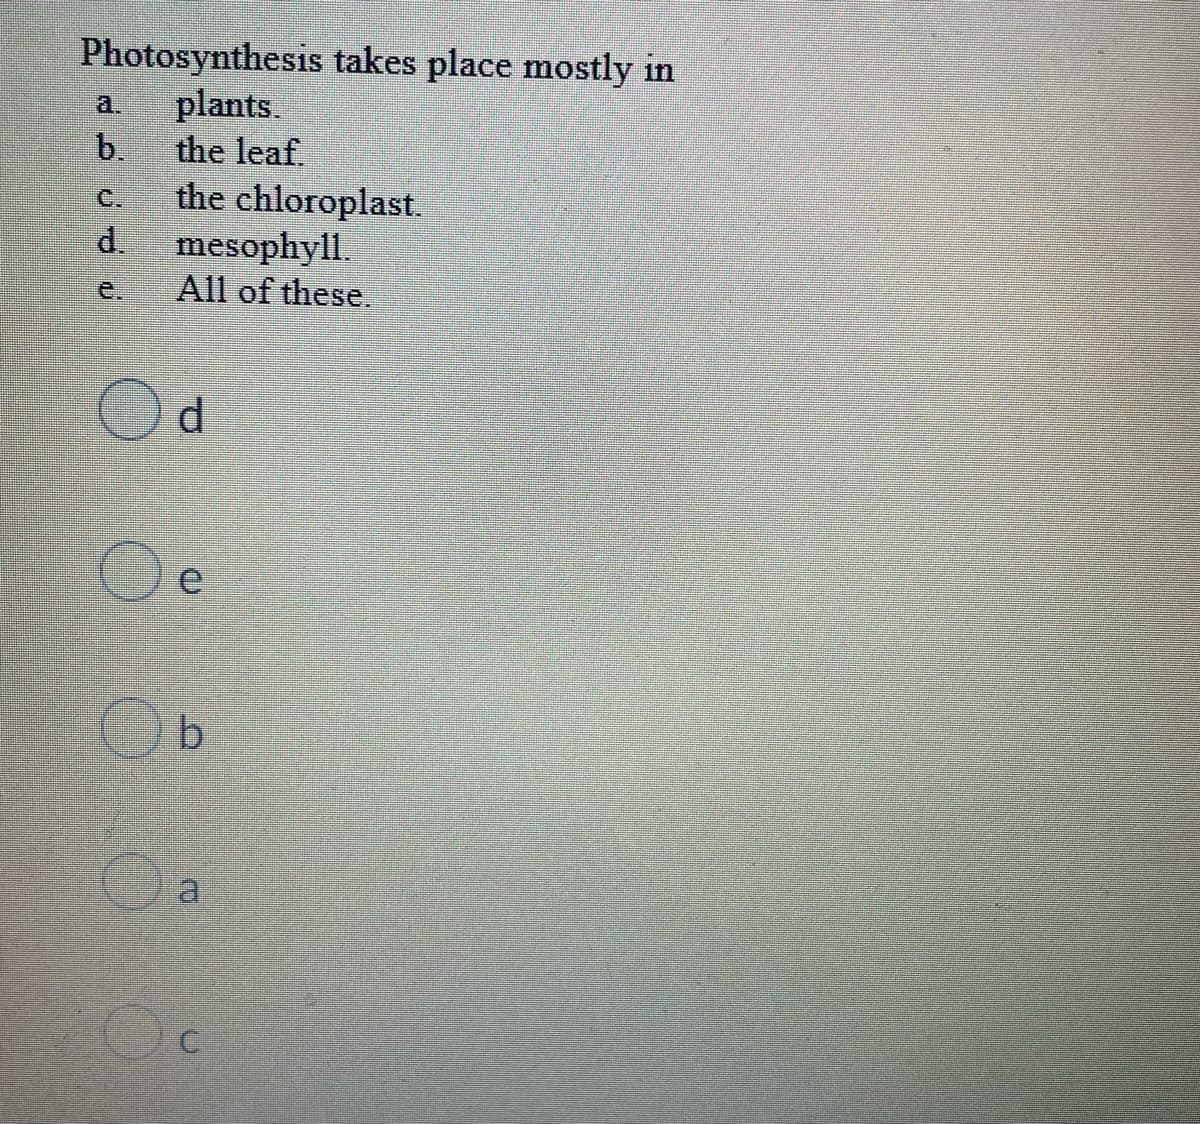 Photosynthesis takes place mostly in
a. plants.
b.
the leaf.
d.
the chloroplast.
mesophyll.
All of these.
d
Oe
b